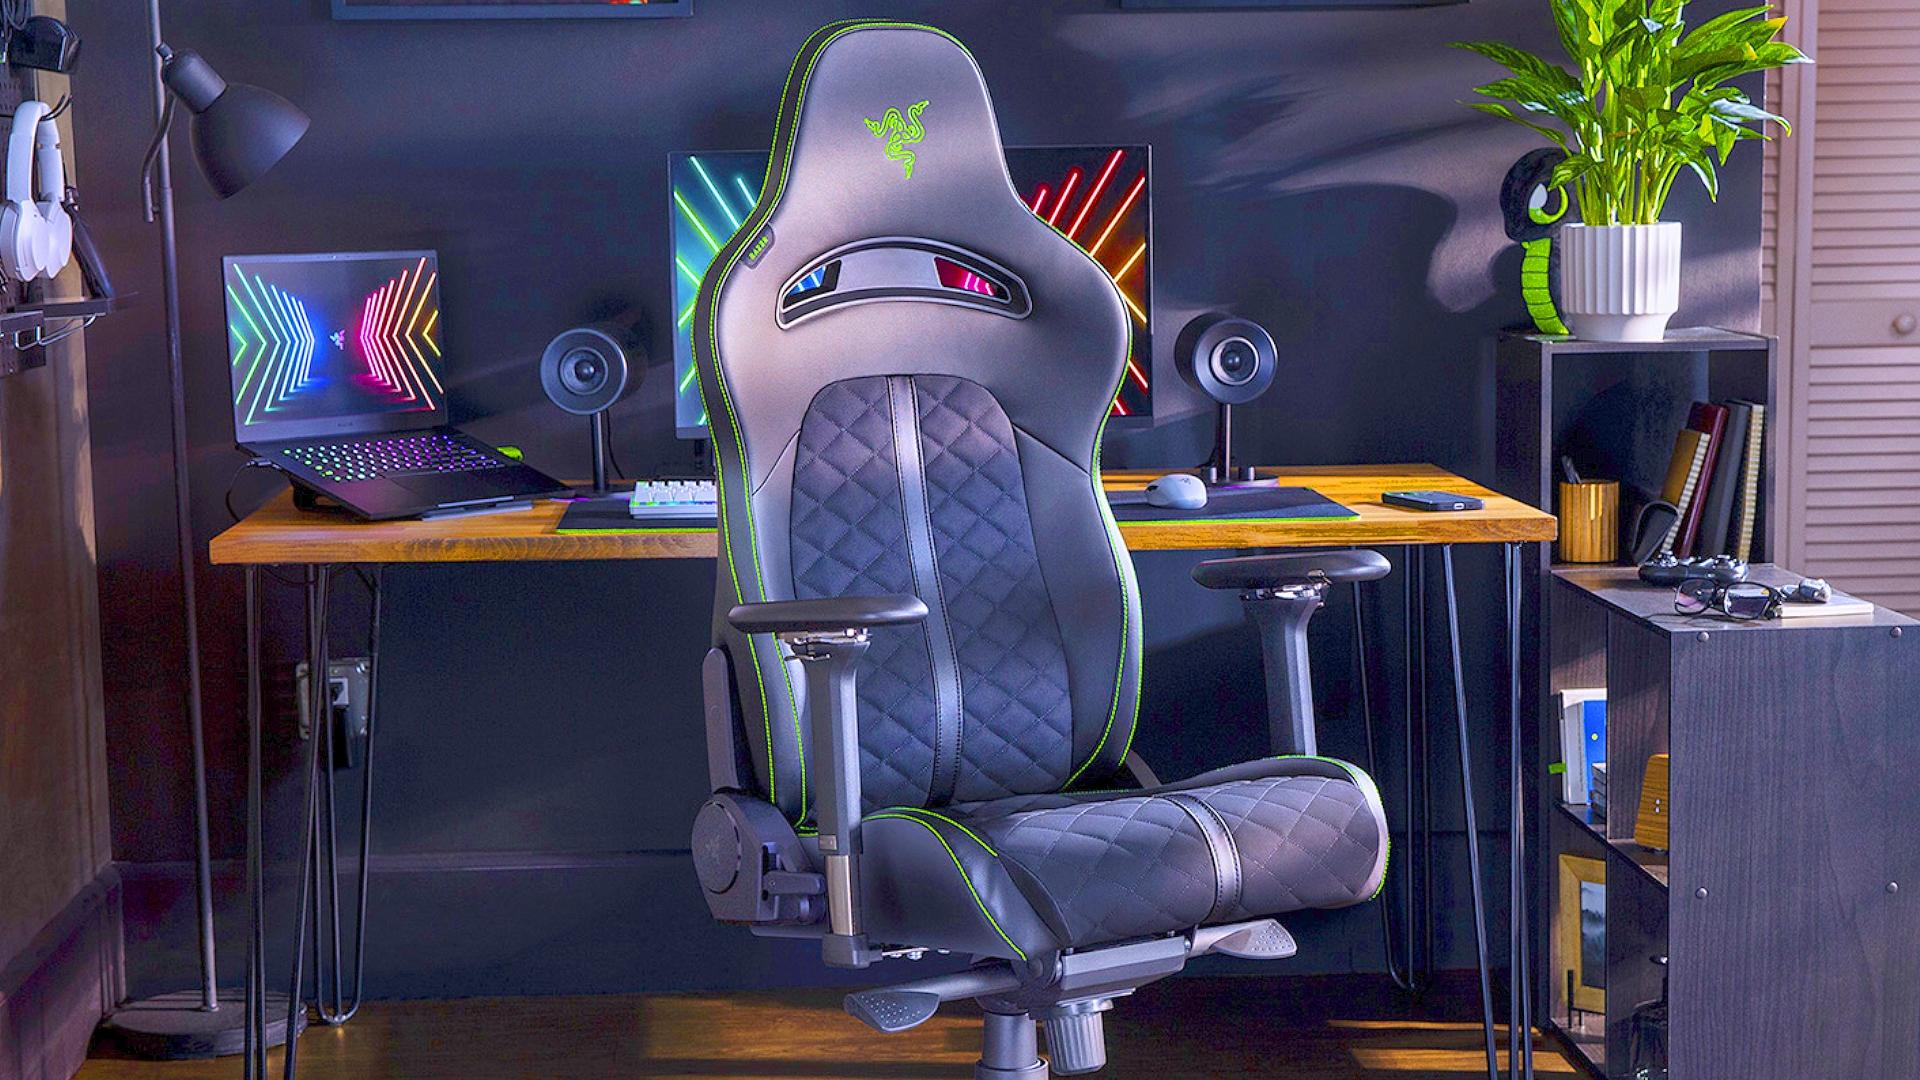 The most comfortable gaming chair, the Razer Enki Pro, sitting in a gaming room.